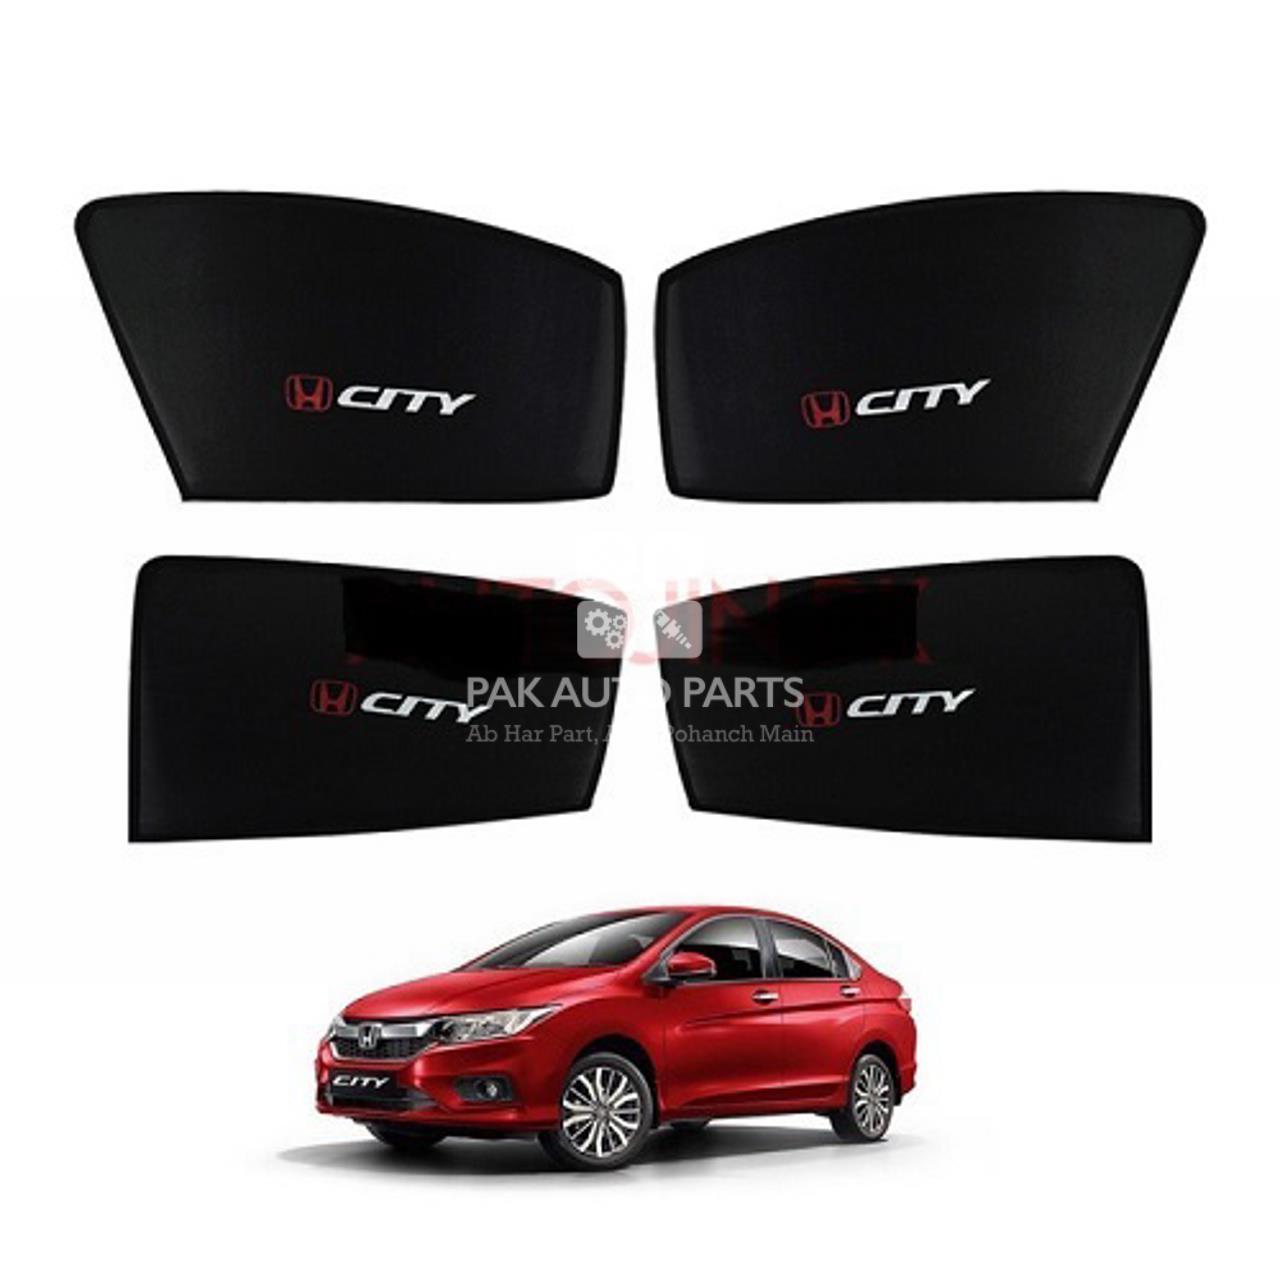 Picture of Honda City 2009-2021 Sun Shades Car Windows Curtains 4 pieces With City Logo | Fold-able | Jet Black